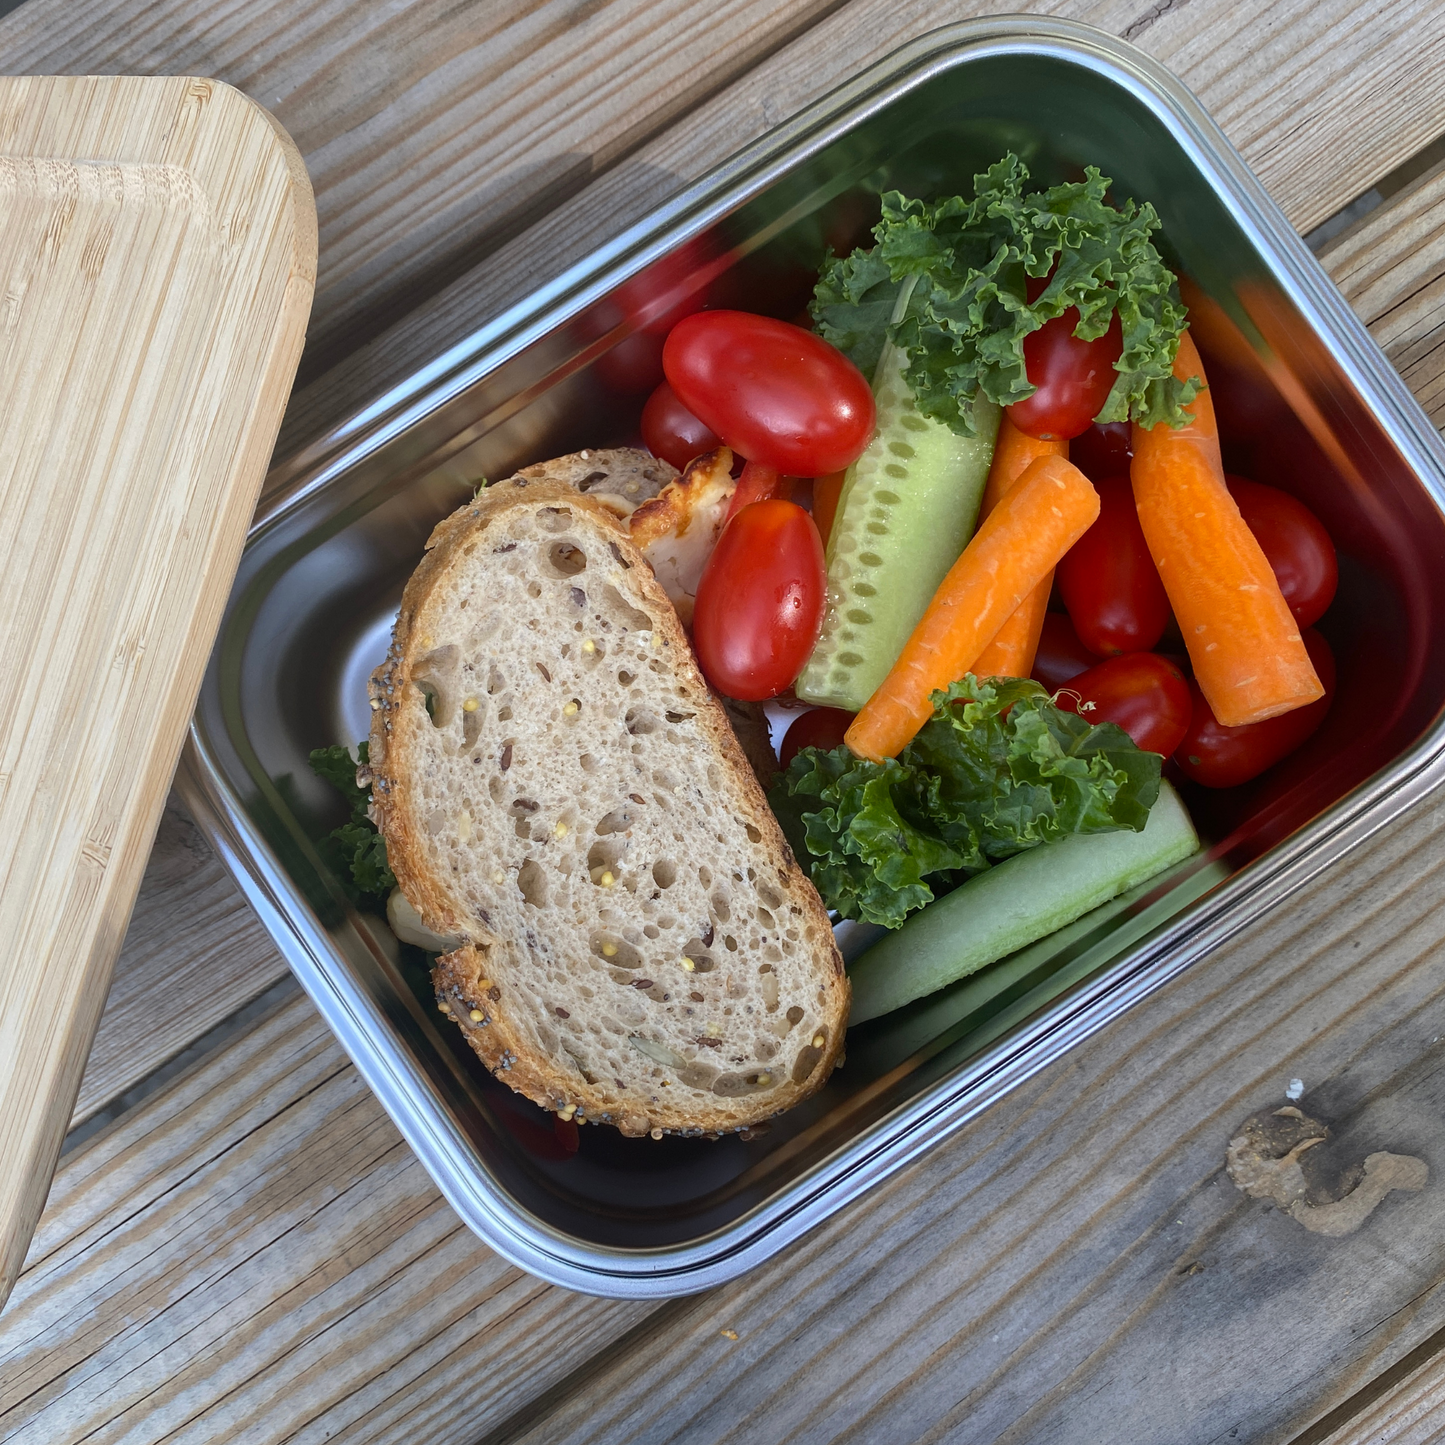 Stainless Steel & Bamboo Lunch Box